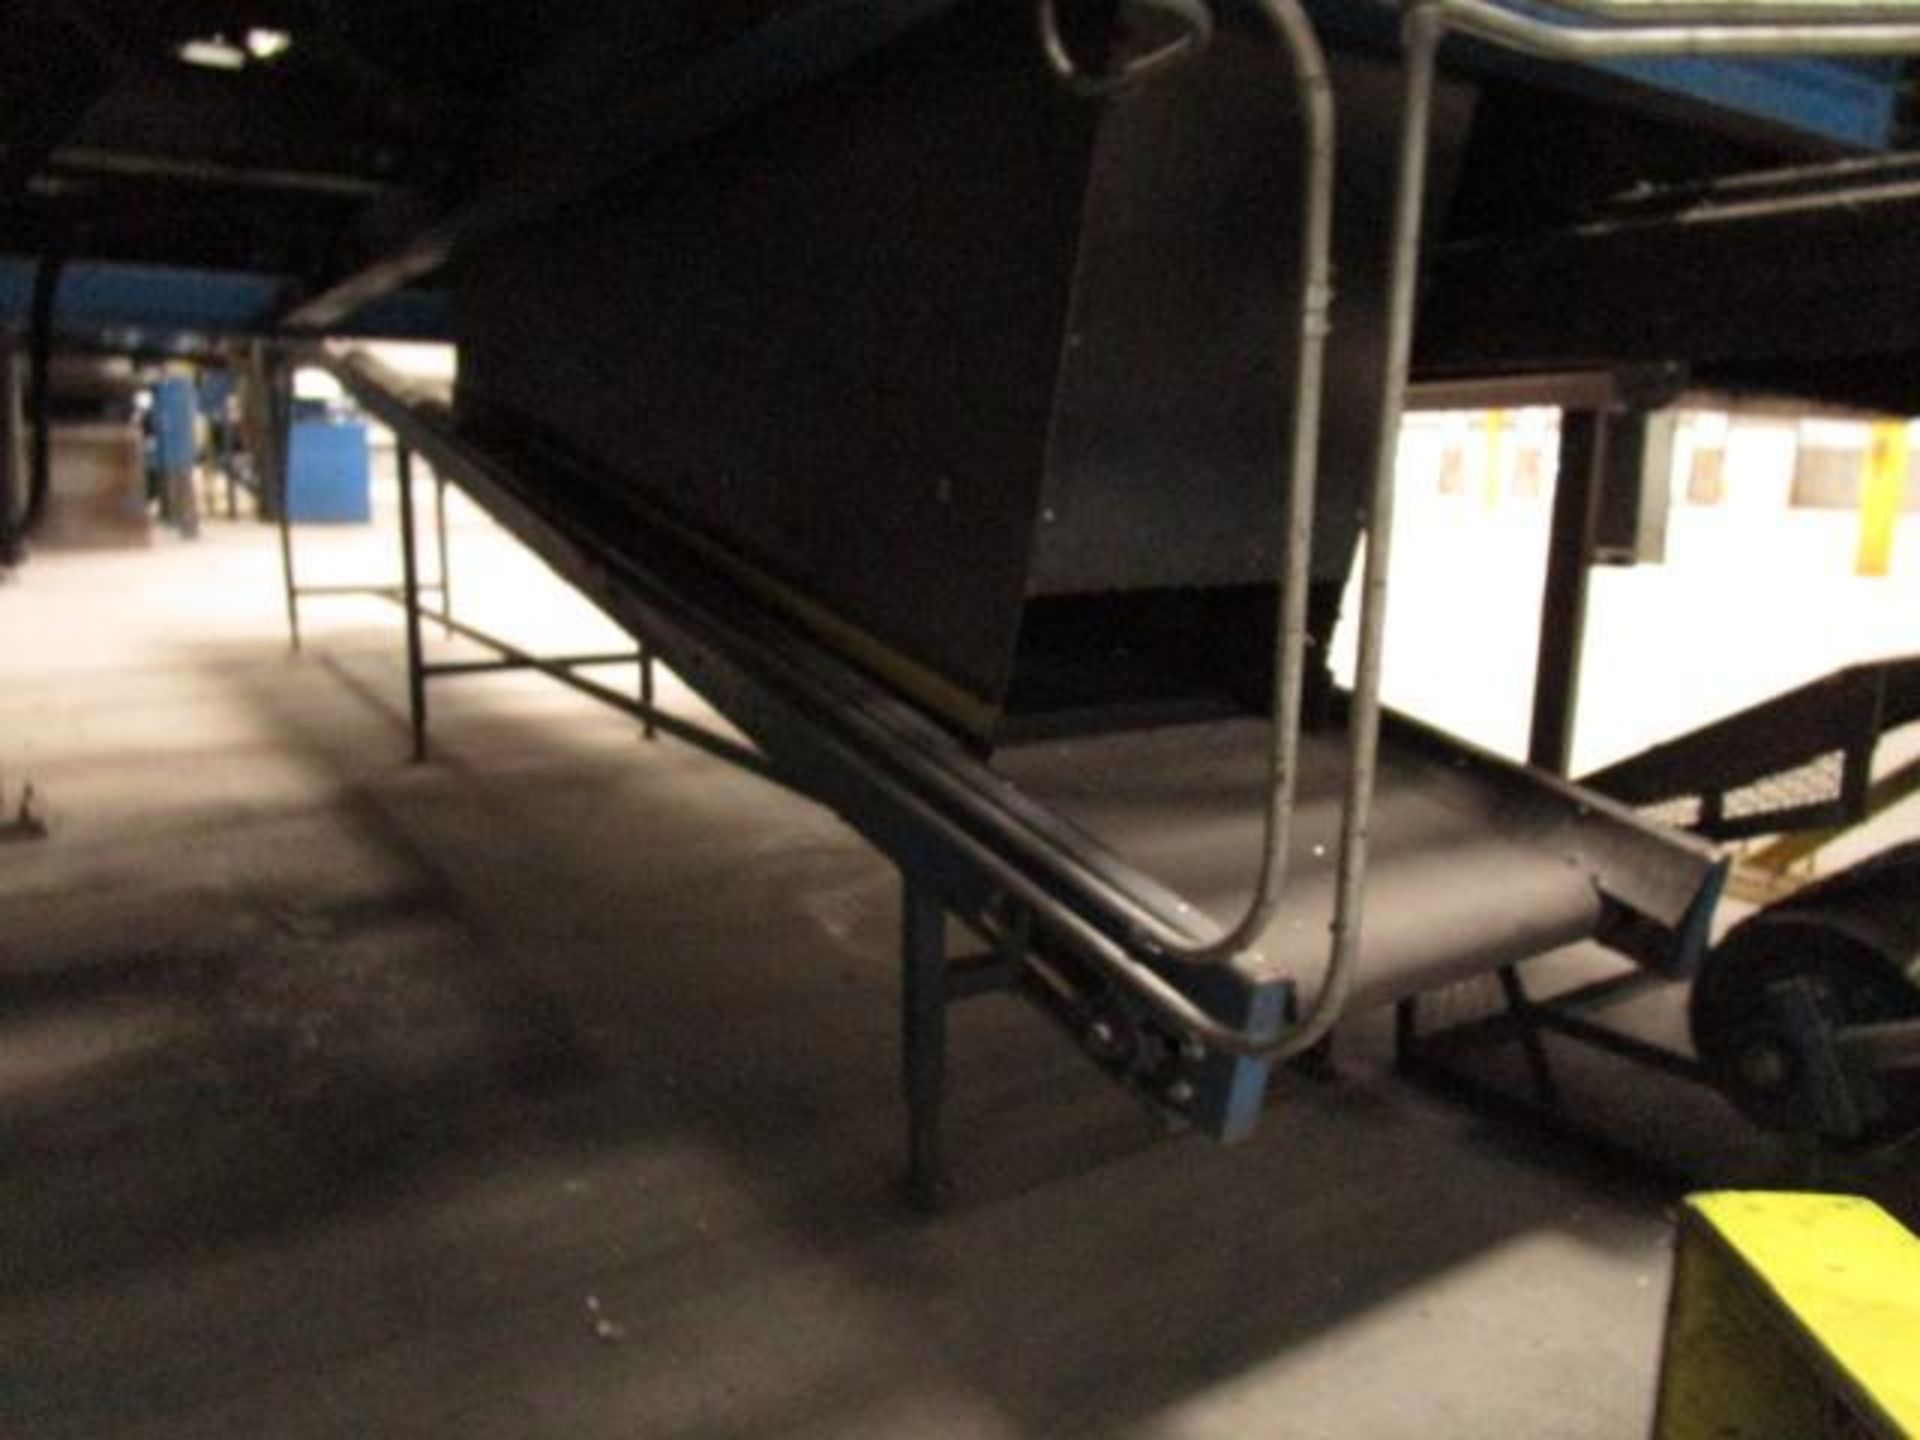 Inclined Belt Conveyer - Image 4 of 5